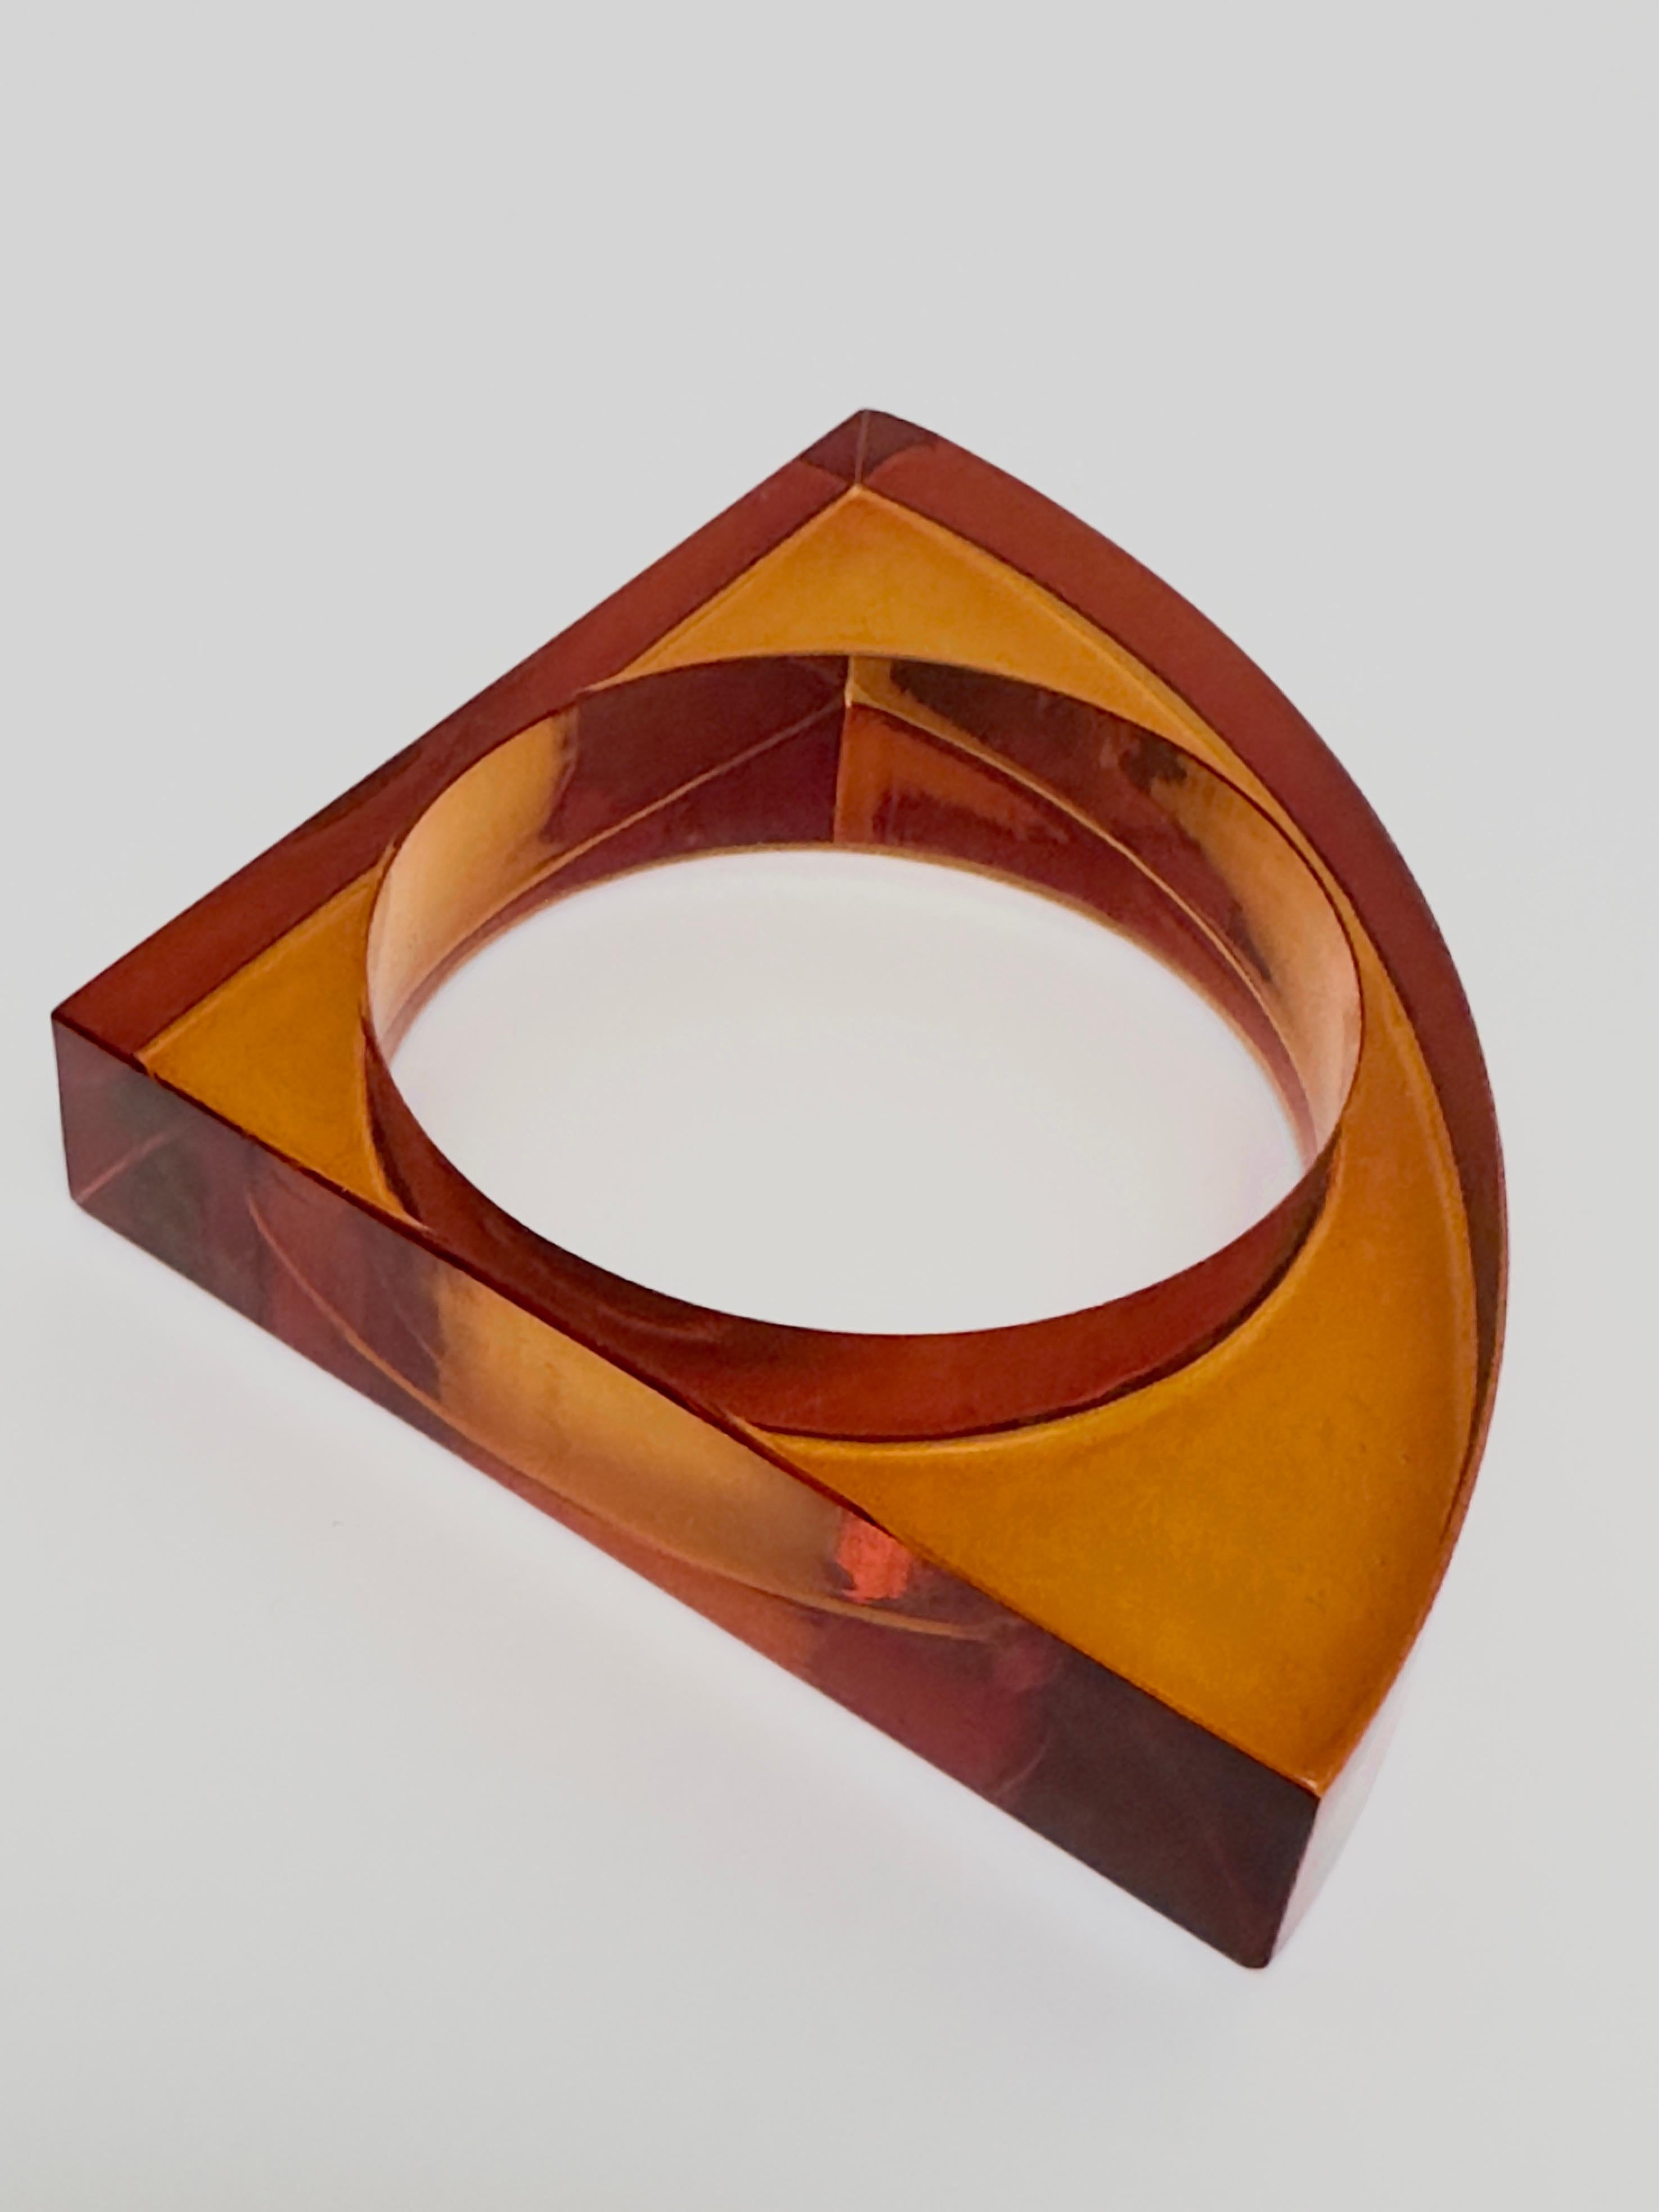 Half object, half jewel this sculptural bangle bears the handwritten and engraved signature of the artist.

Measurements (cm) :
triangle's sides 9.7, 14 in its largest part, 1.4 d.
wrist : 6.8 int. diam

Former engineer, Isaky settles his reputation